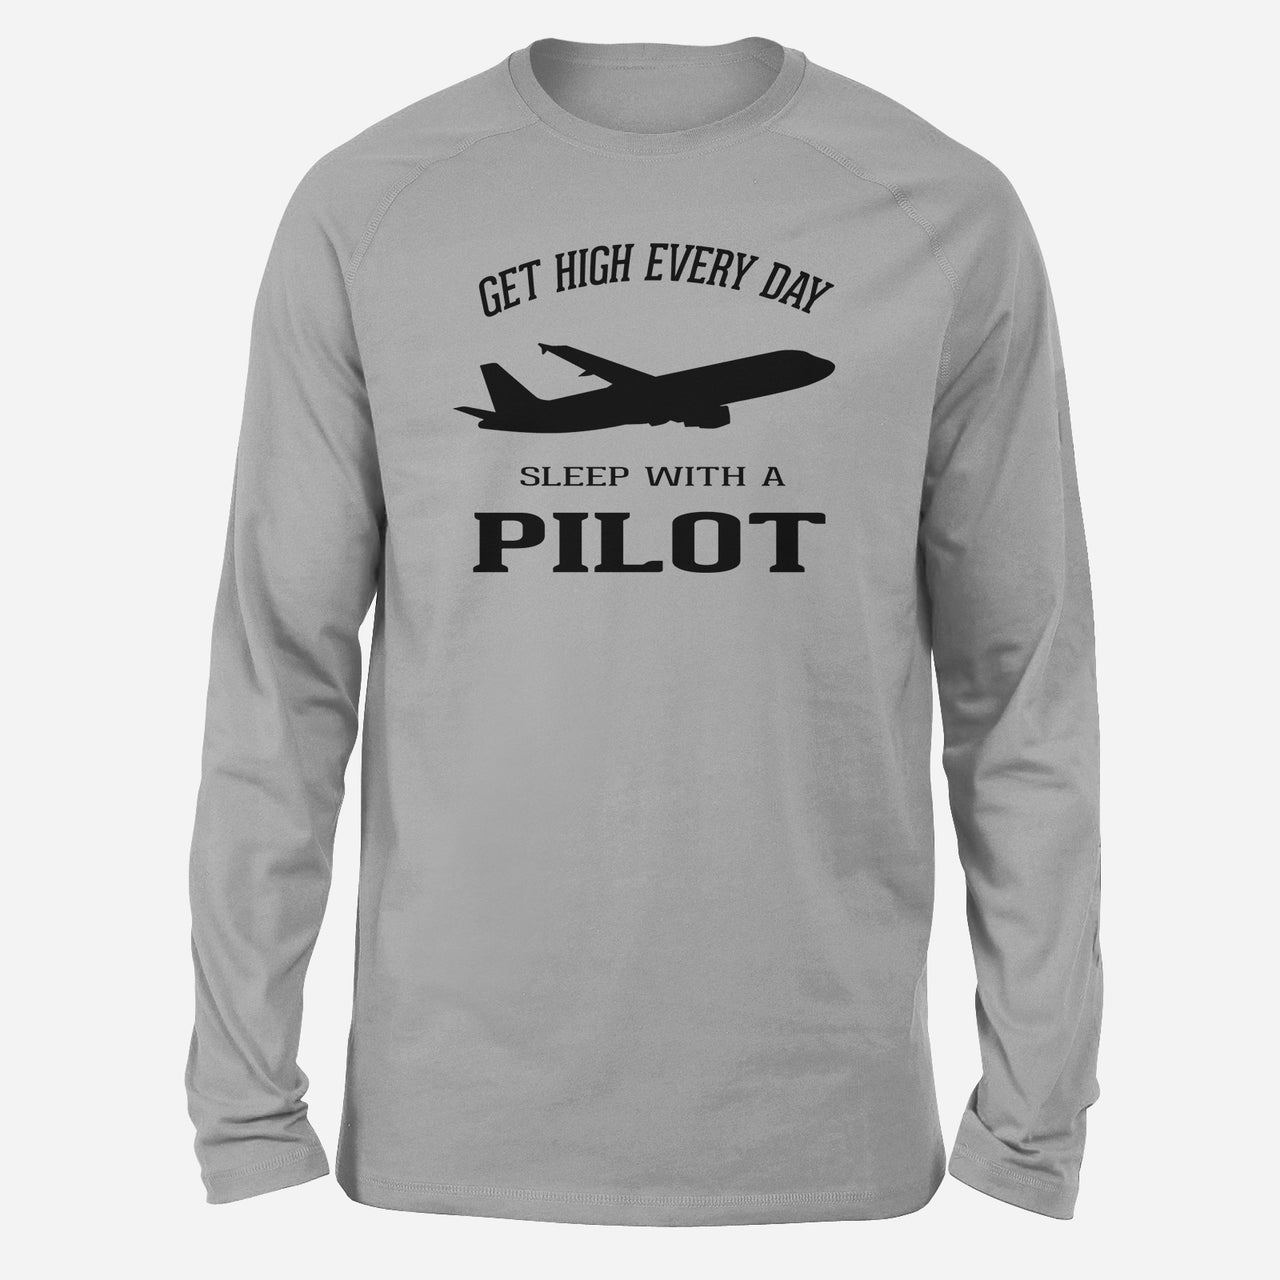 Get High Every Day Sleep With A Pilot Designed Long-Sleeve T-Shirts